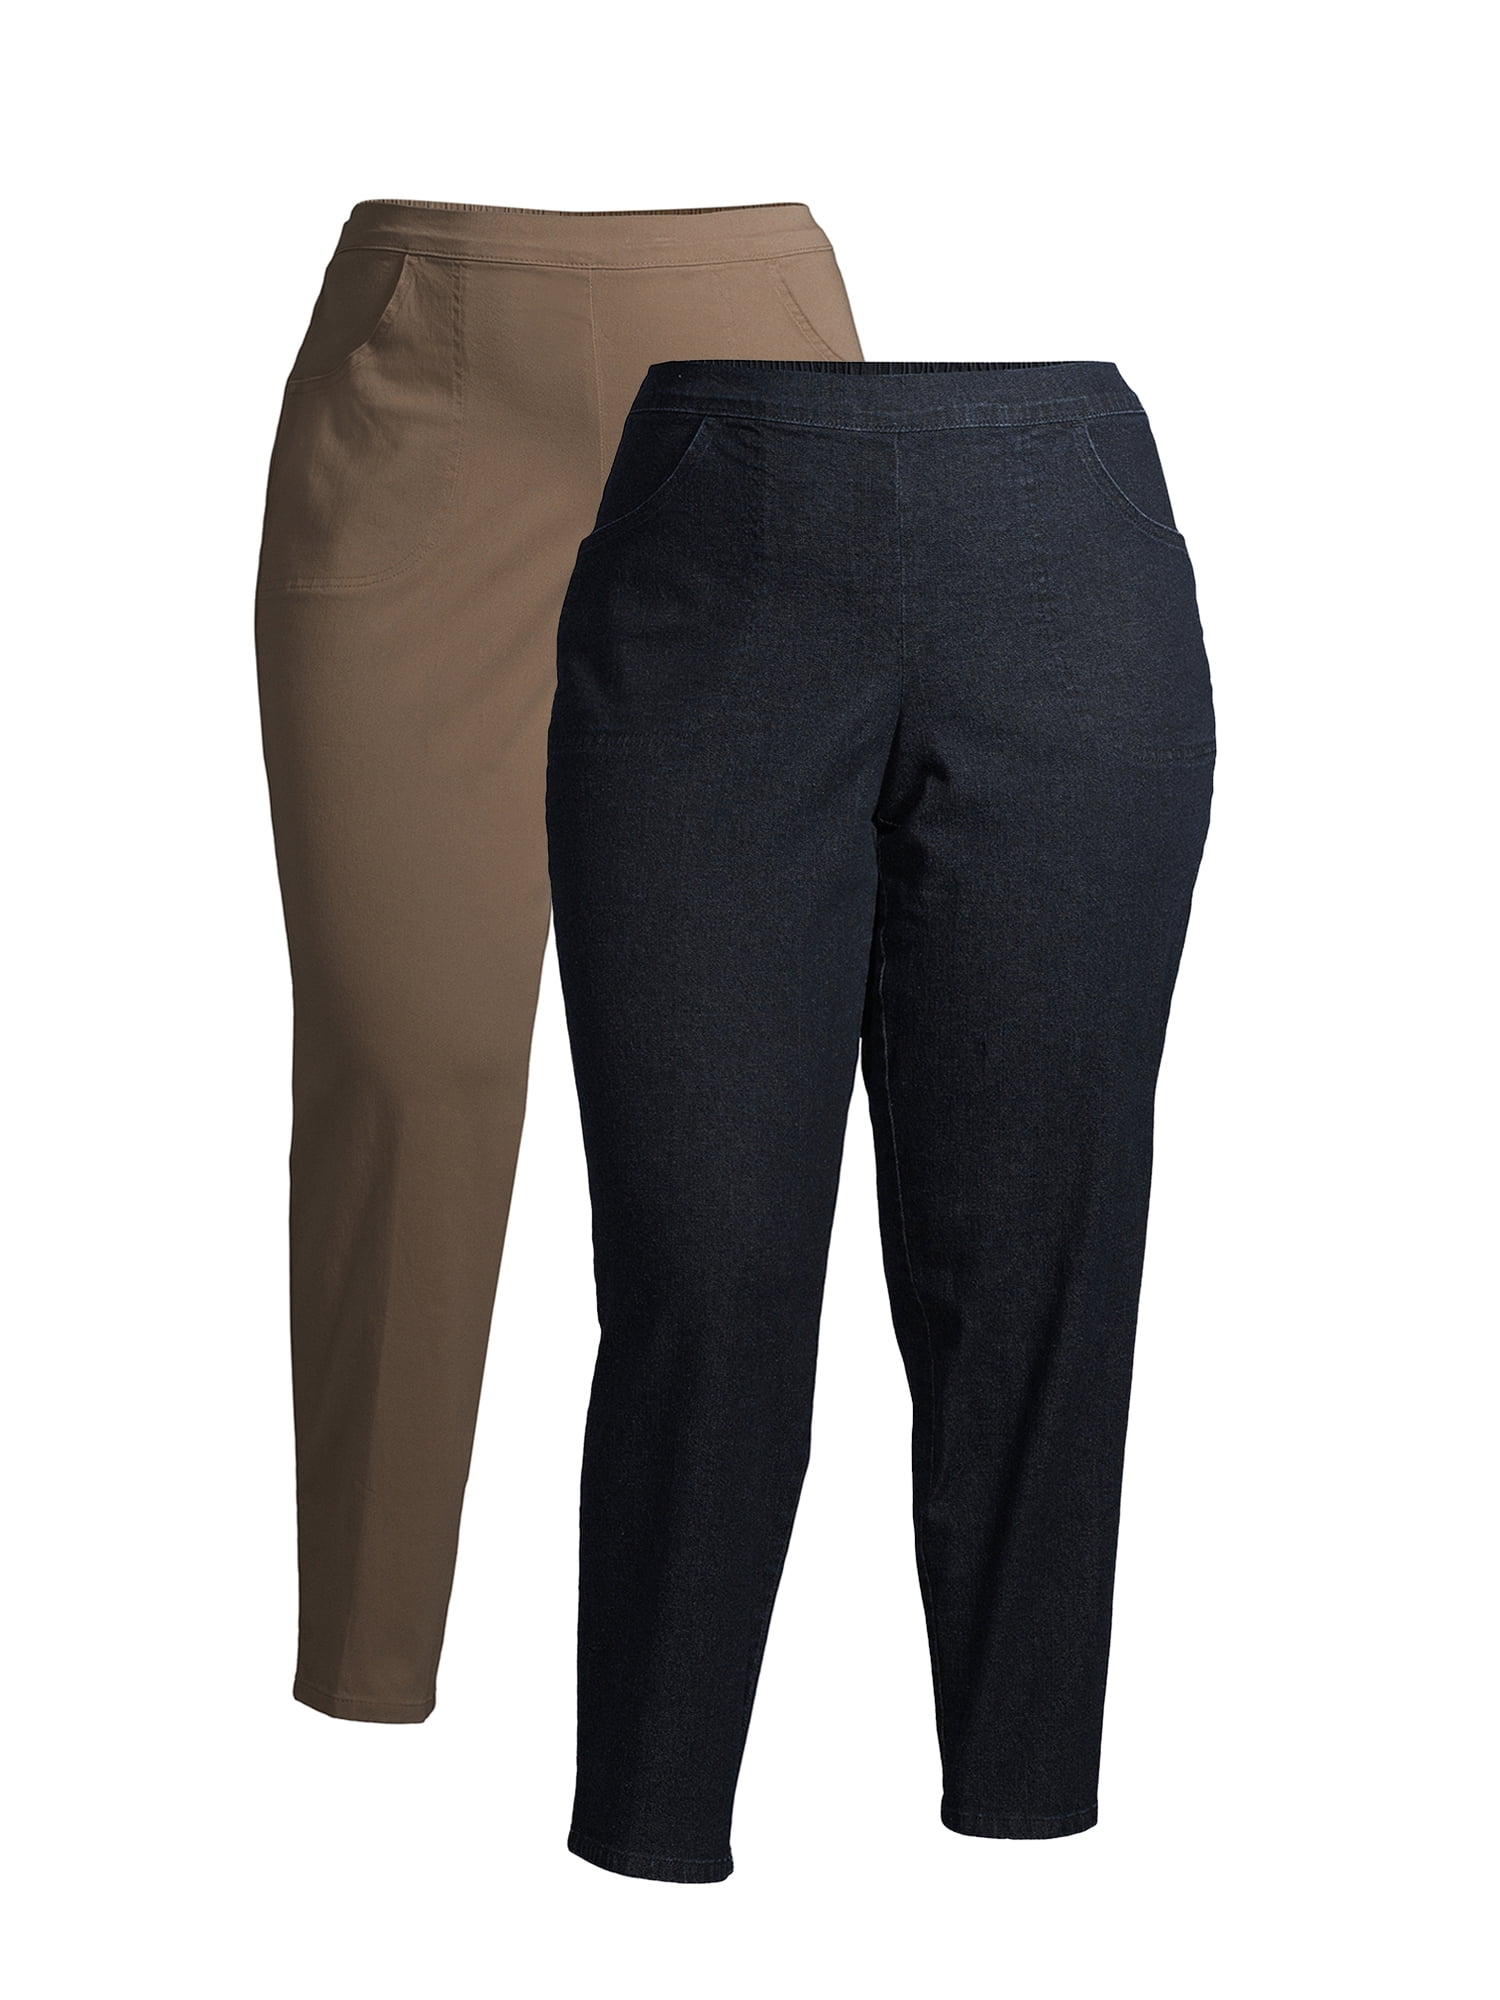 Just My Size Womens Plus Size Pull on 2Pocket Stretch Woven Pants Also  in Petite  Walmartcom